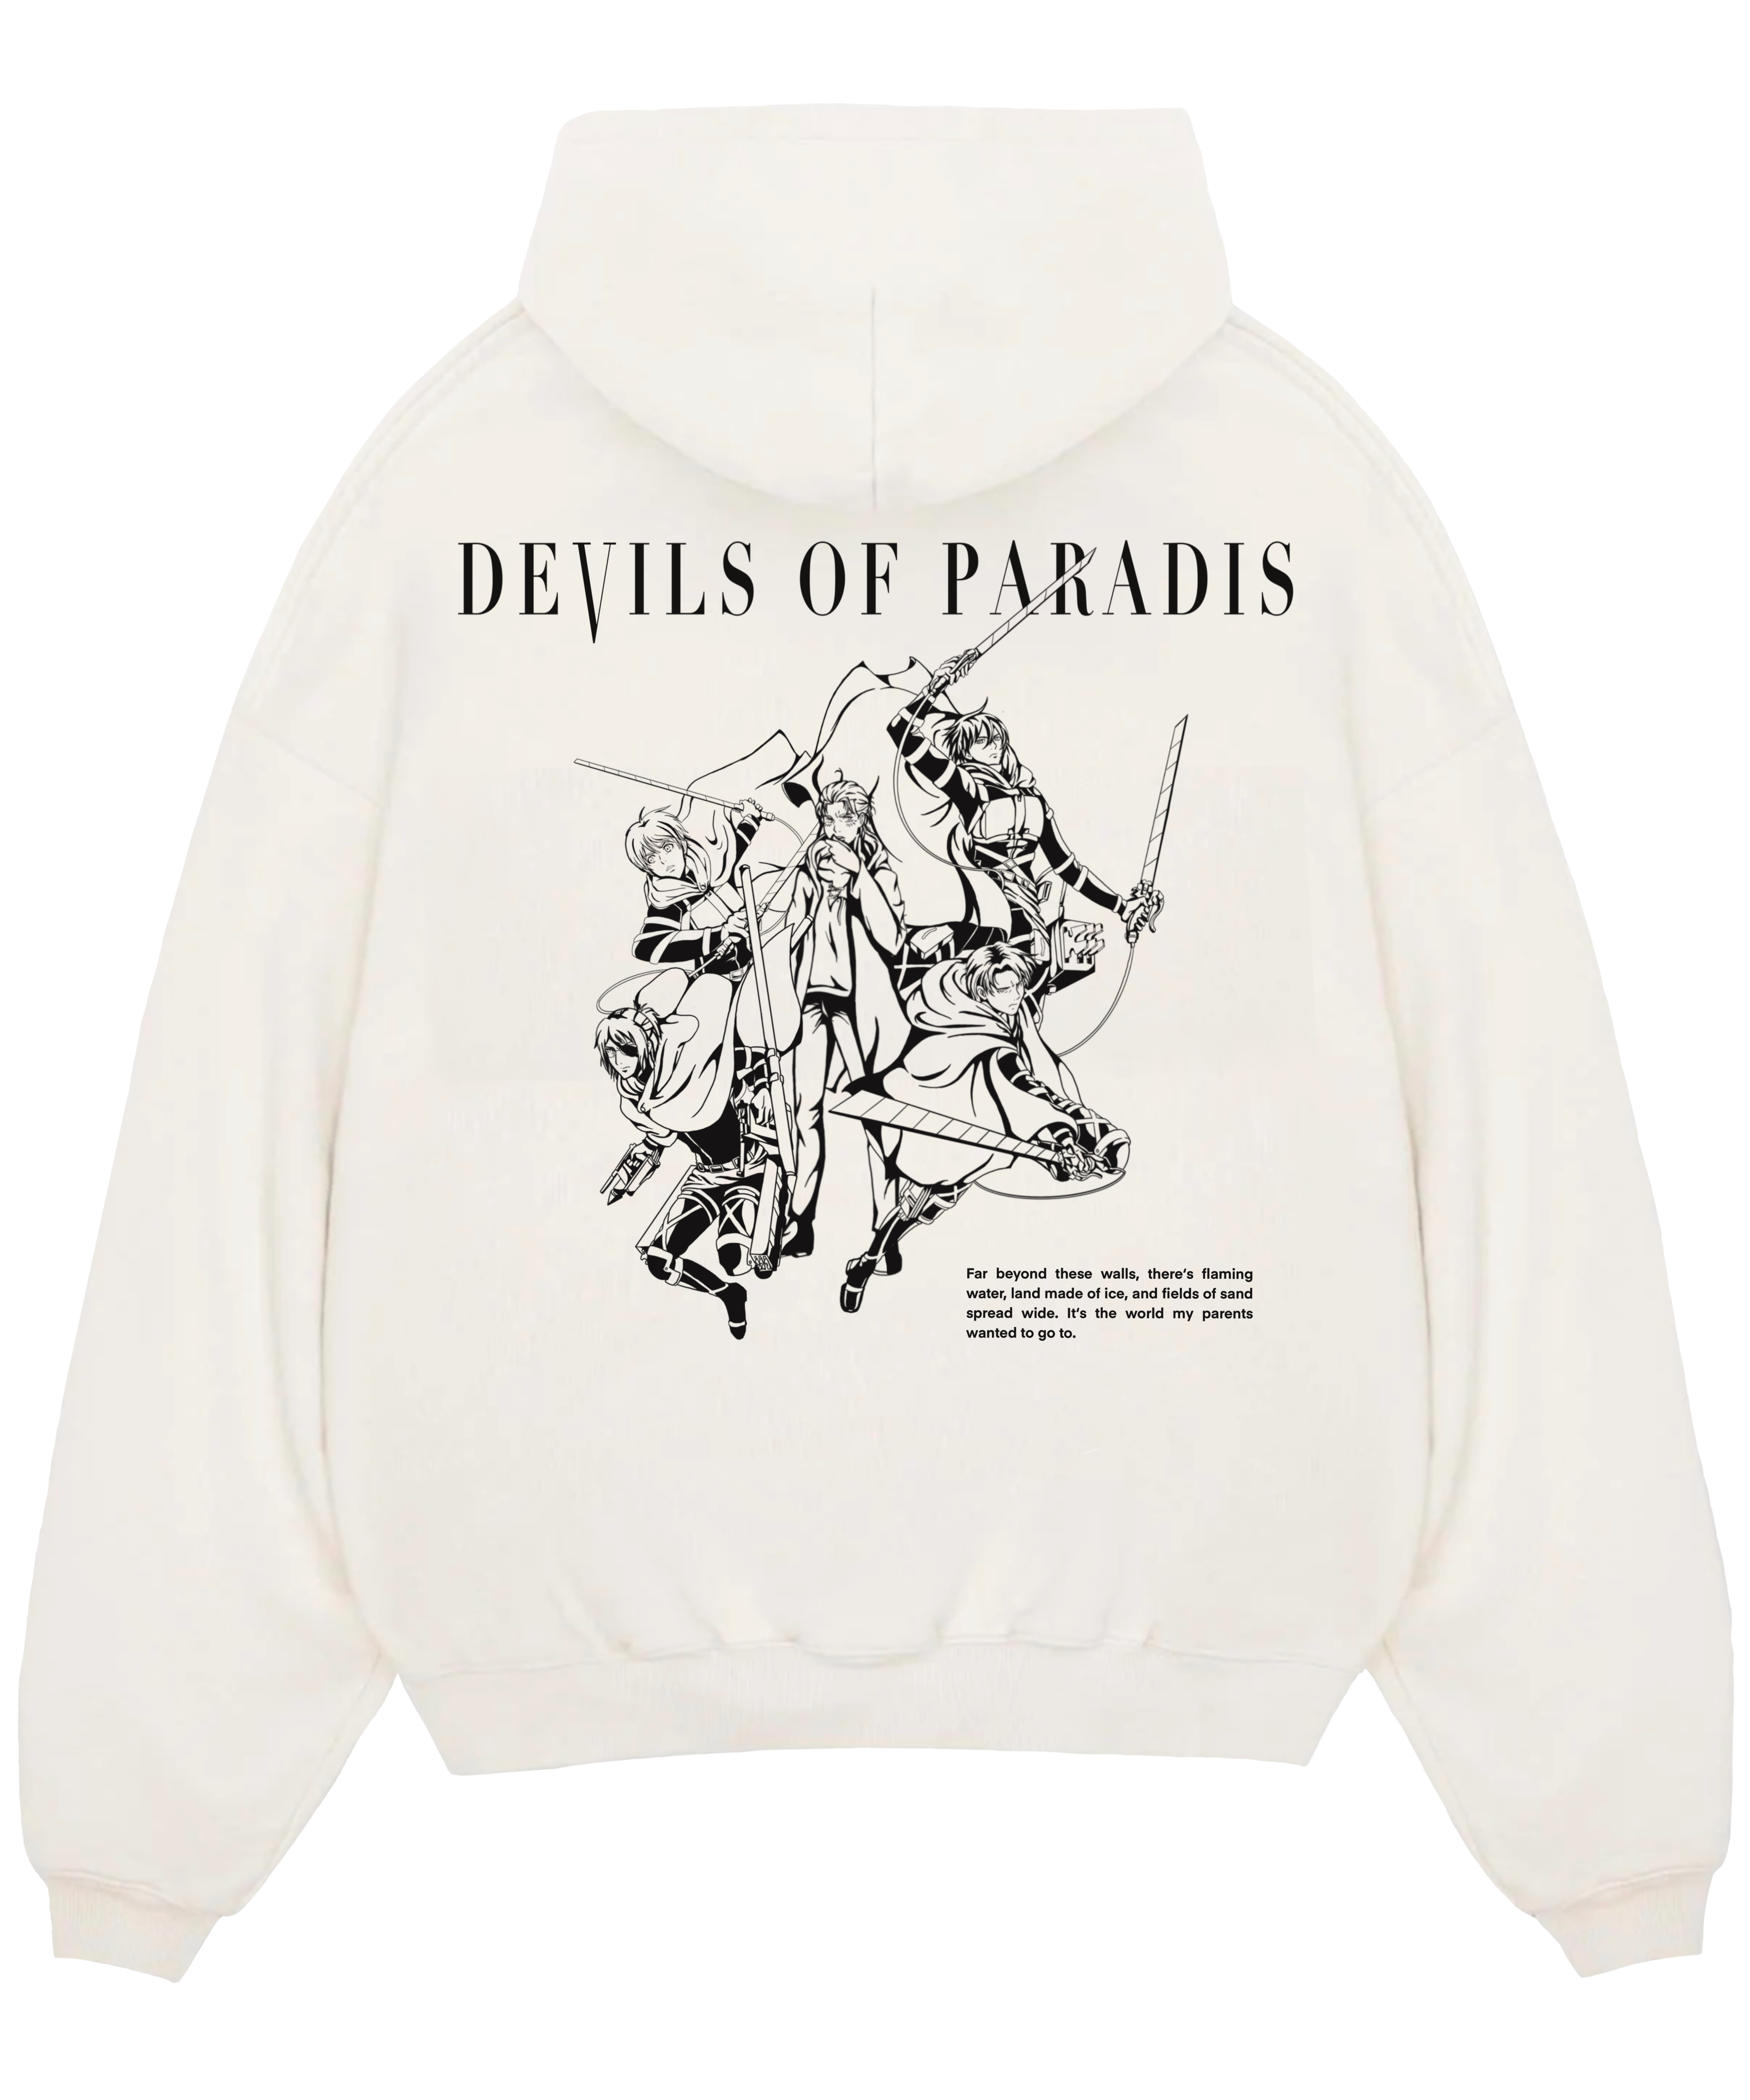 "Devils Of Paradis - AOT" Oversized Hoodie